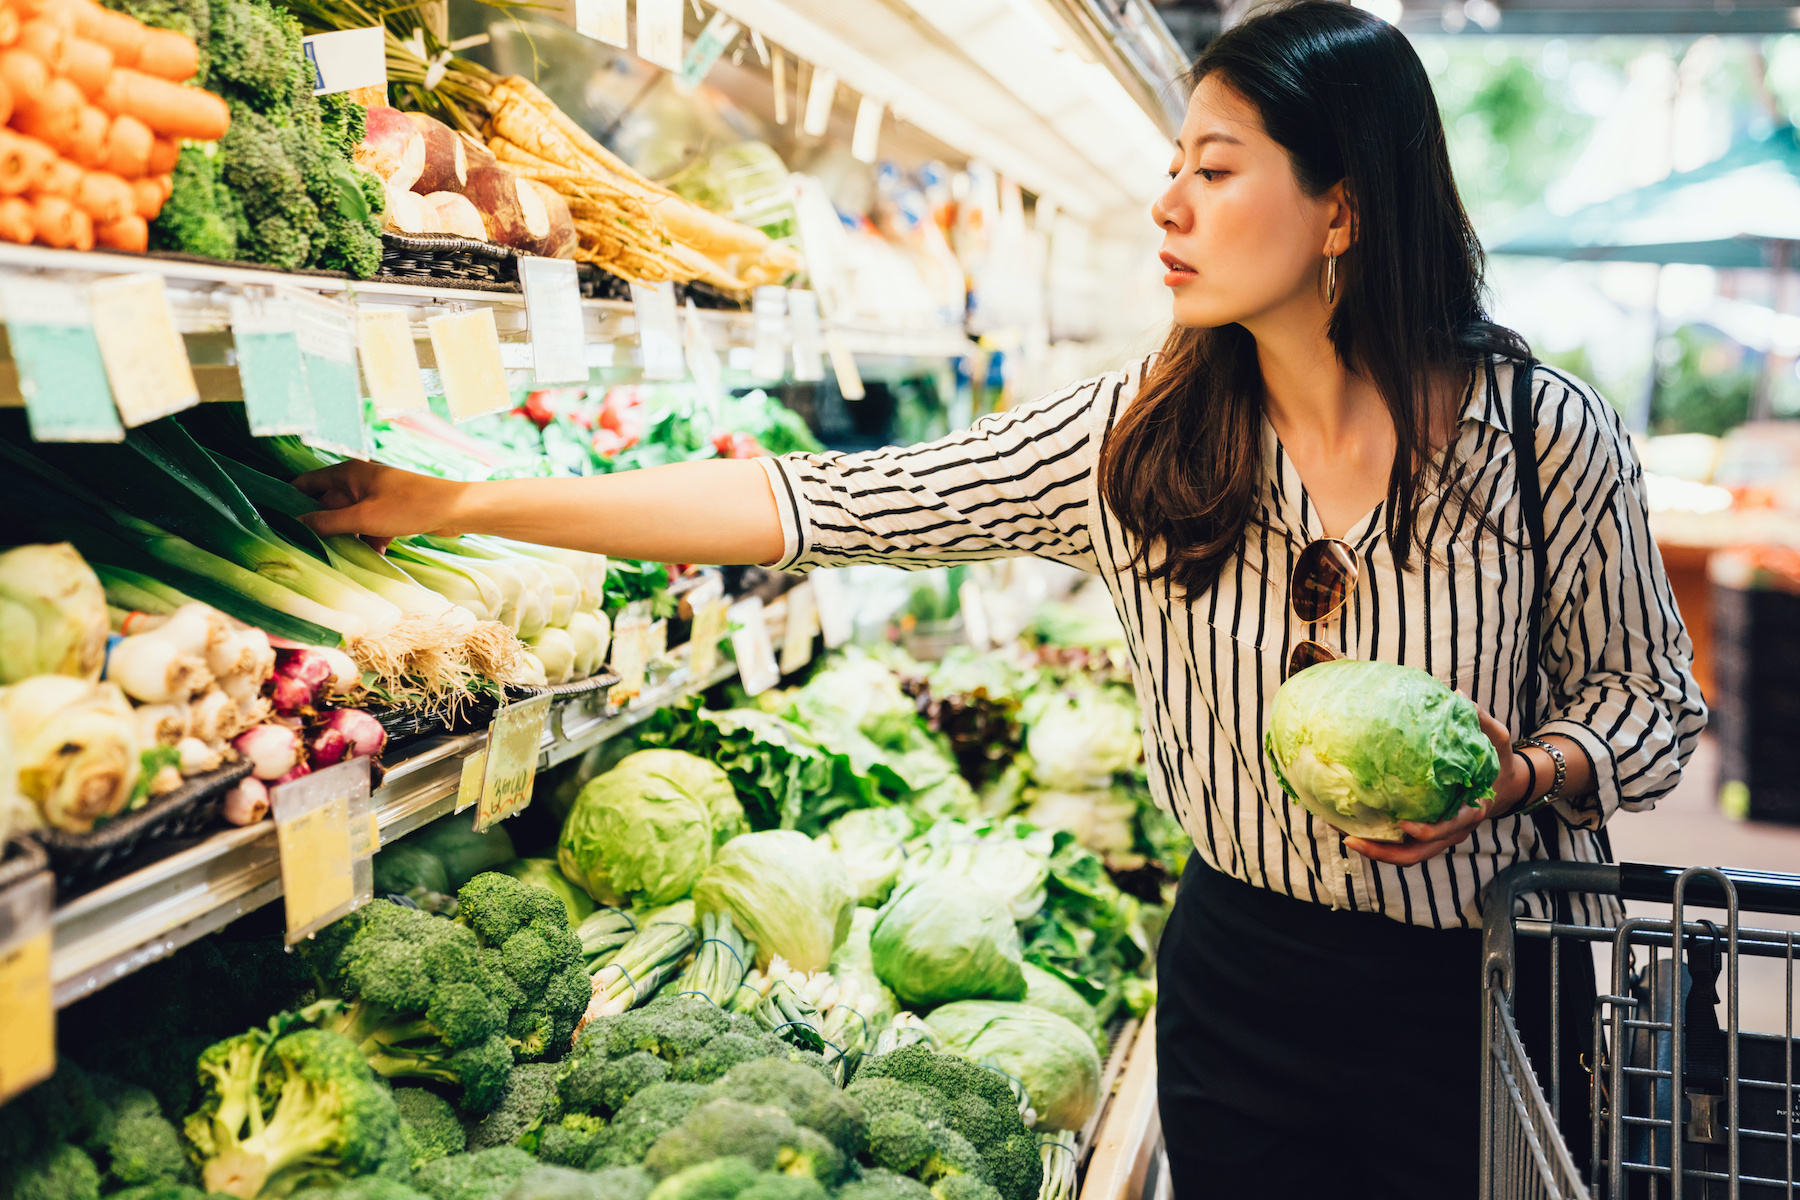 Health food packaging buzzwords are confusing. This guide can help.